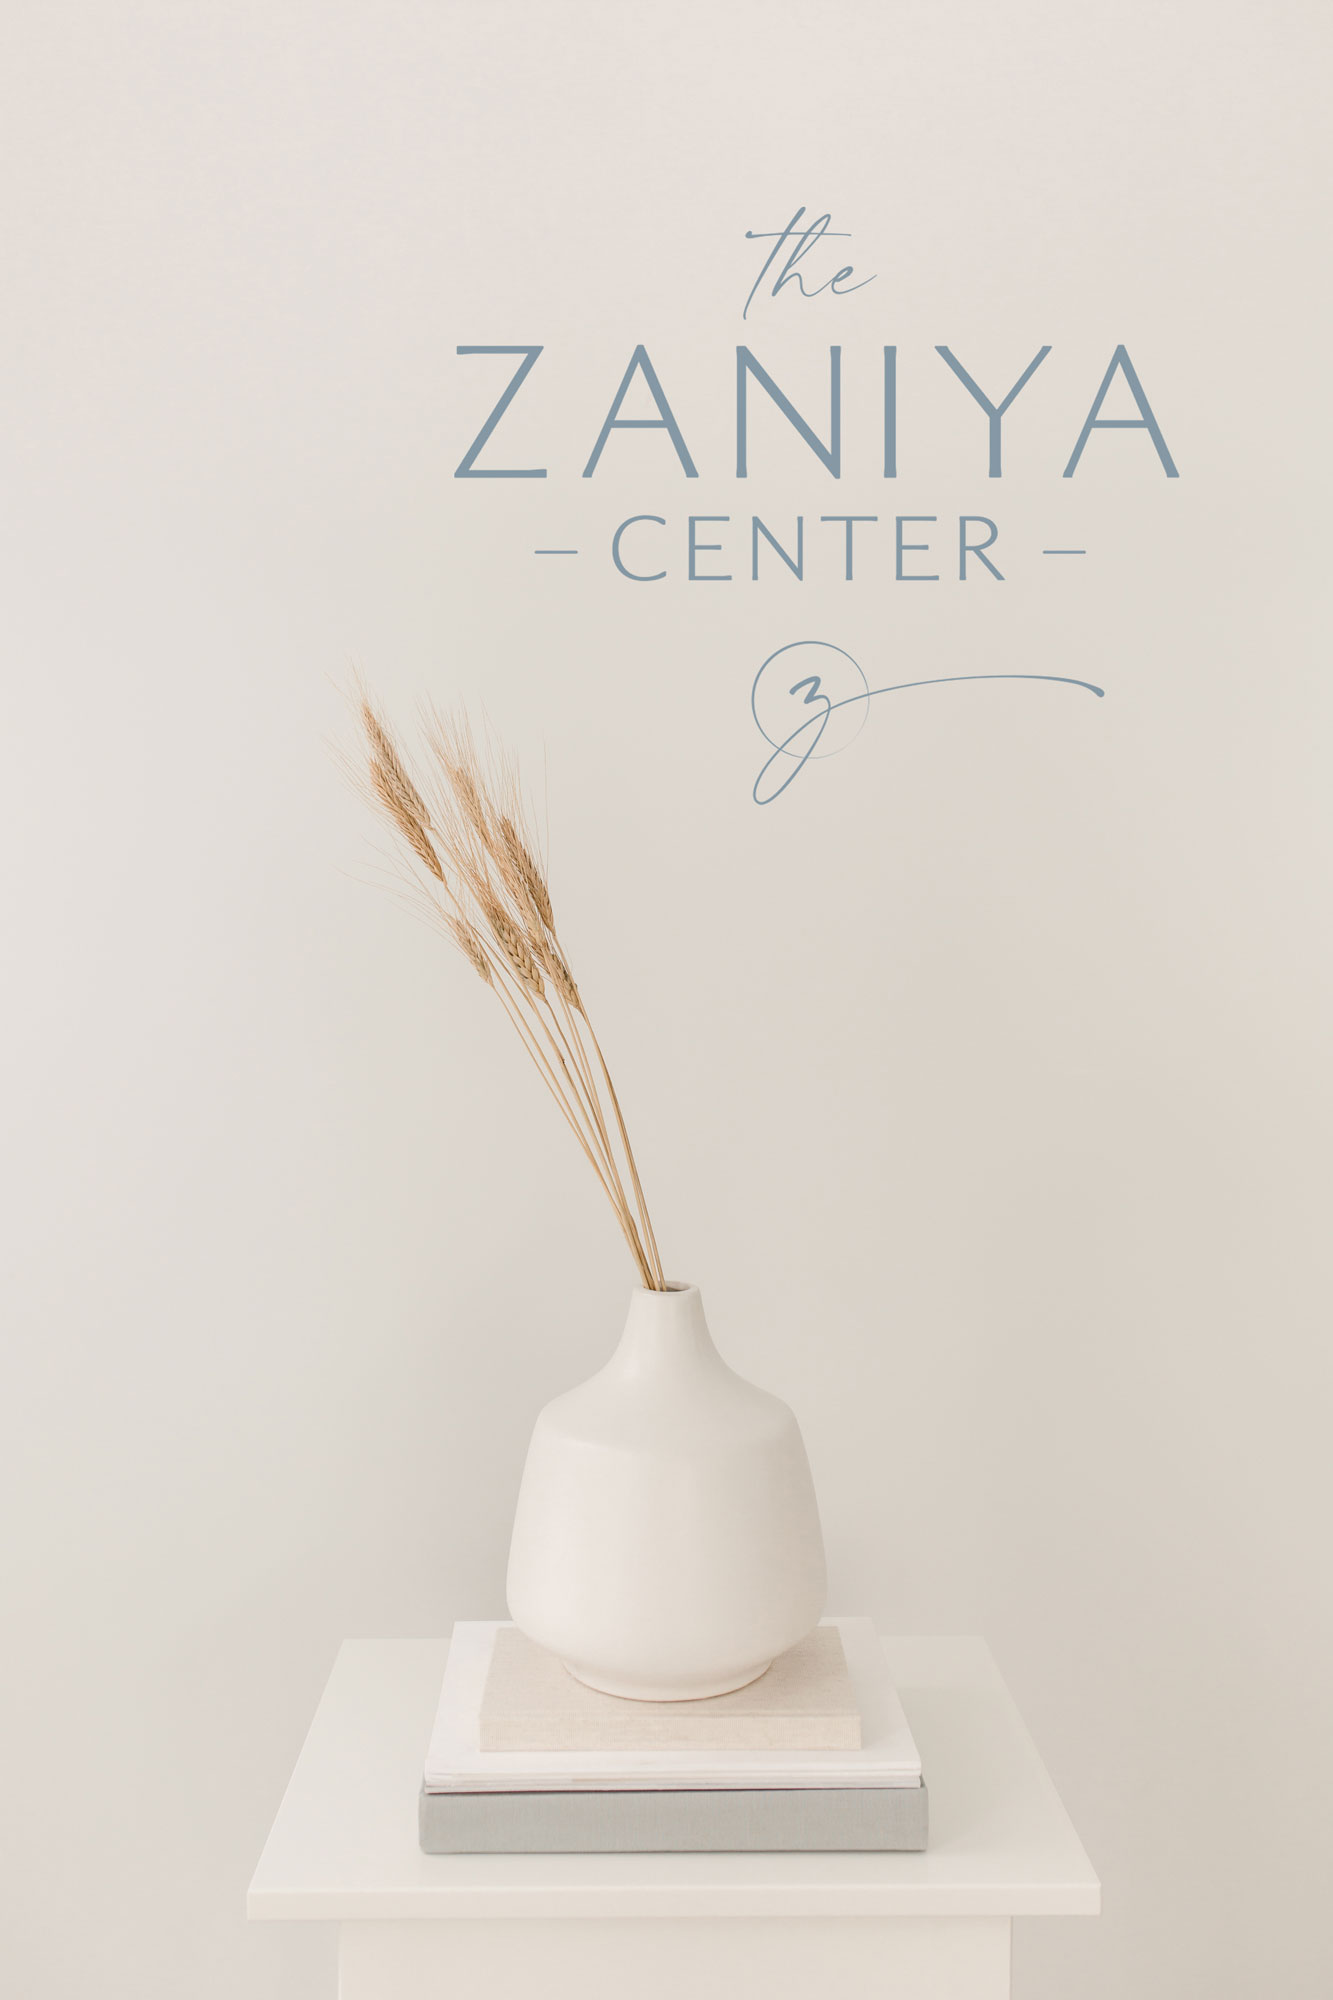 Stack of books on a white end table with a ceramic vase of tall grasses, the wall in the background features the Zaniya Center logo.
